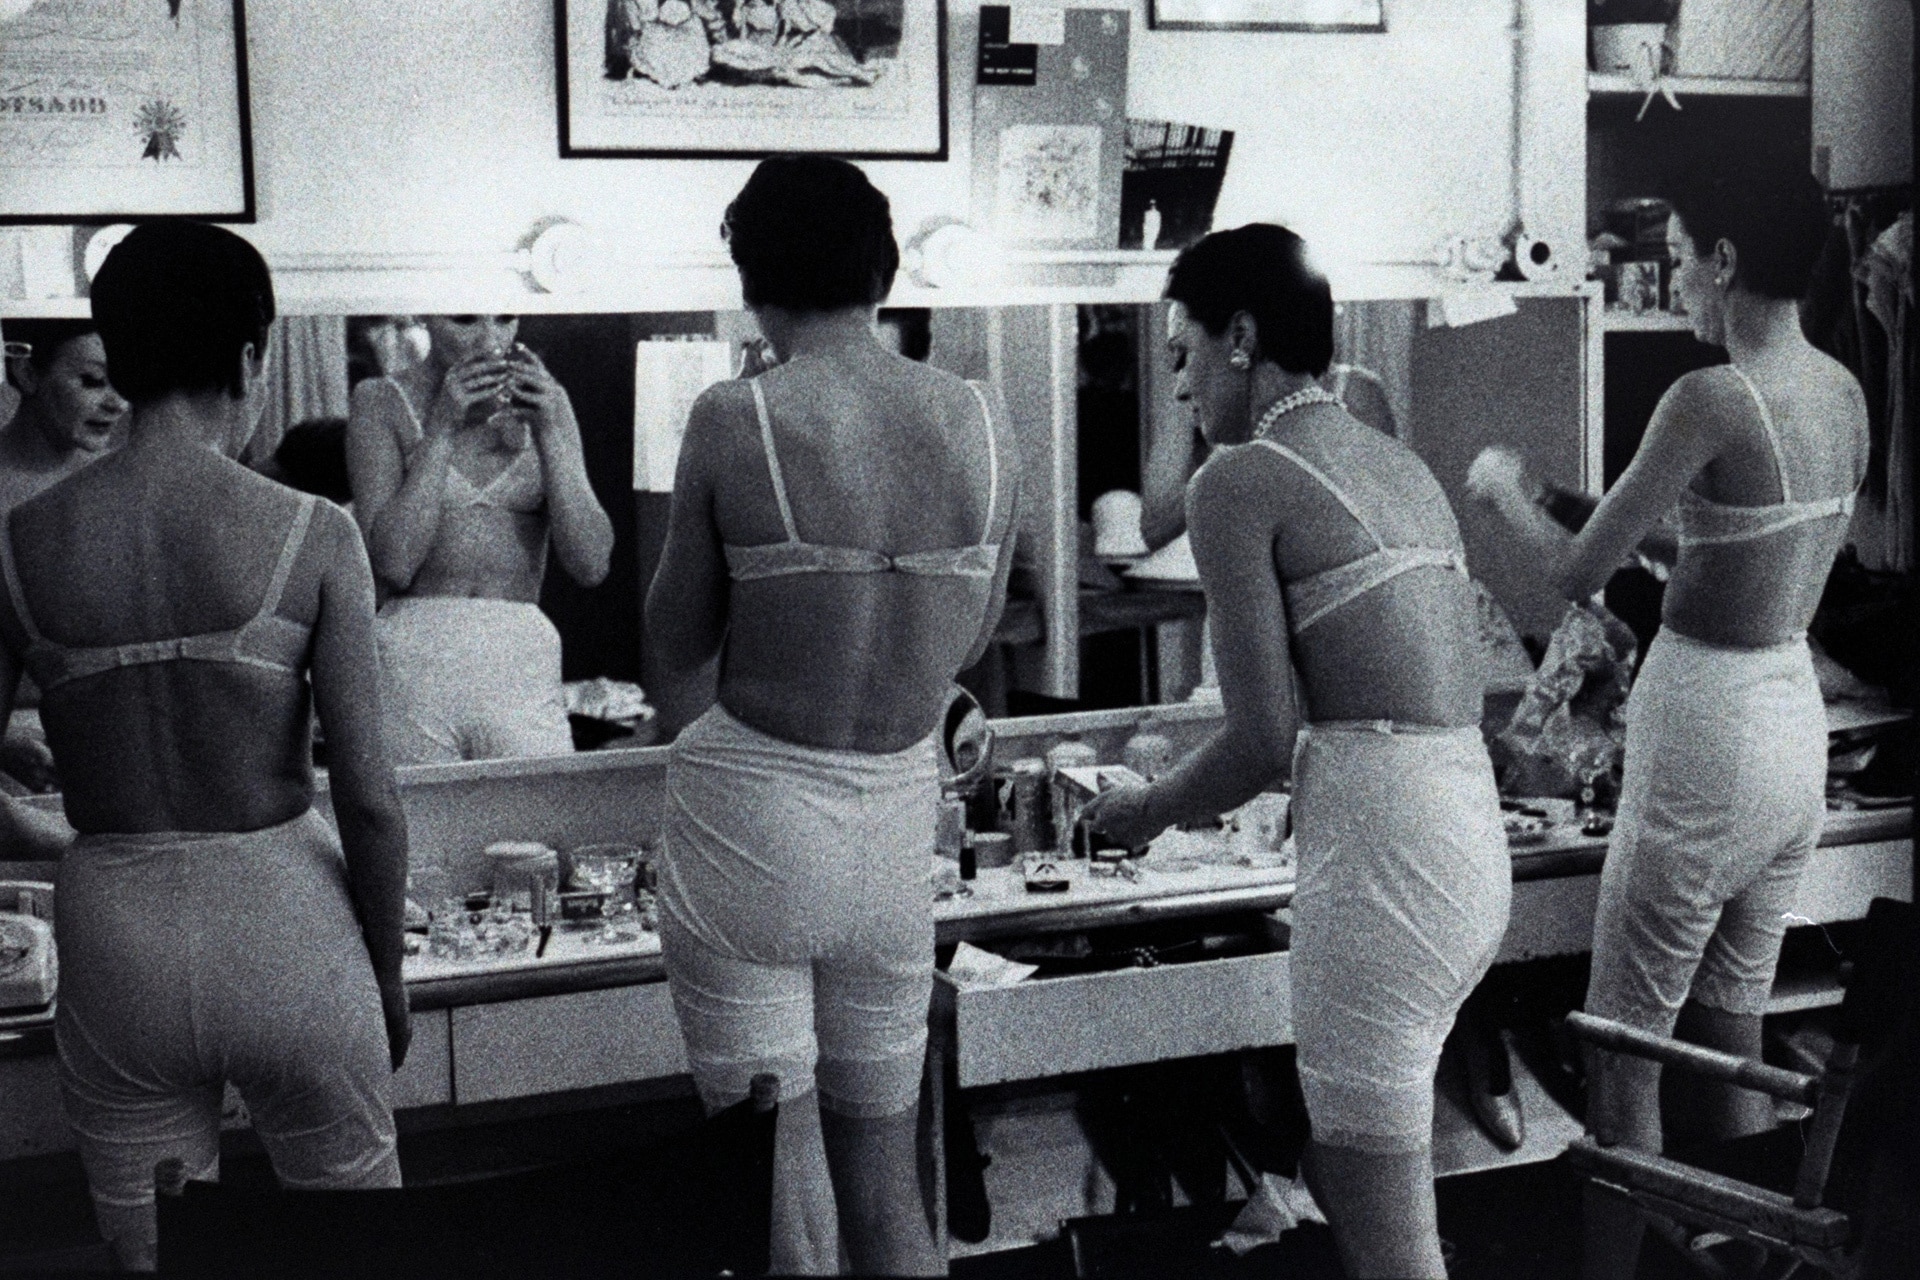 Models backstage at designer Norman Norell’s fashion show in 1963. Image credit: Condé Nast via Getty Images